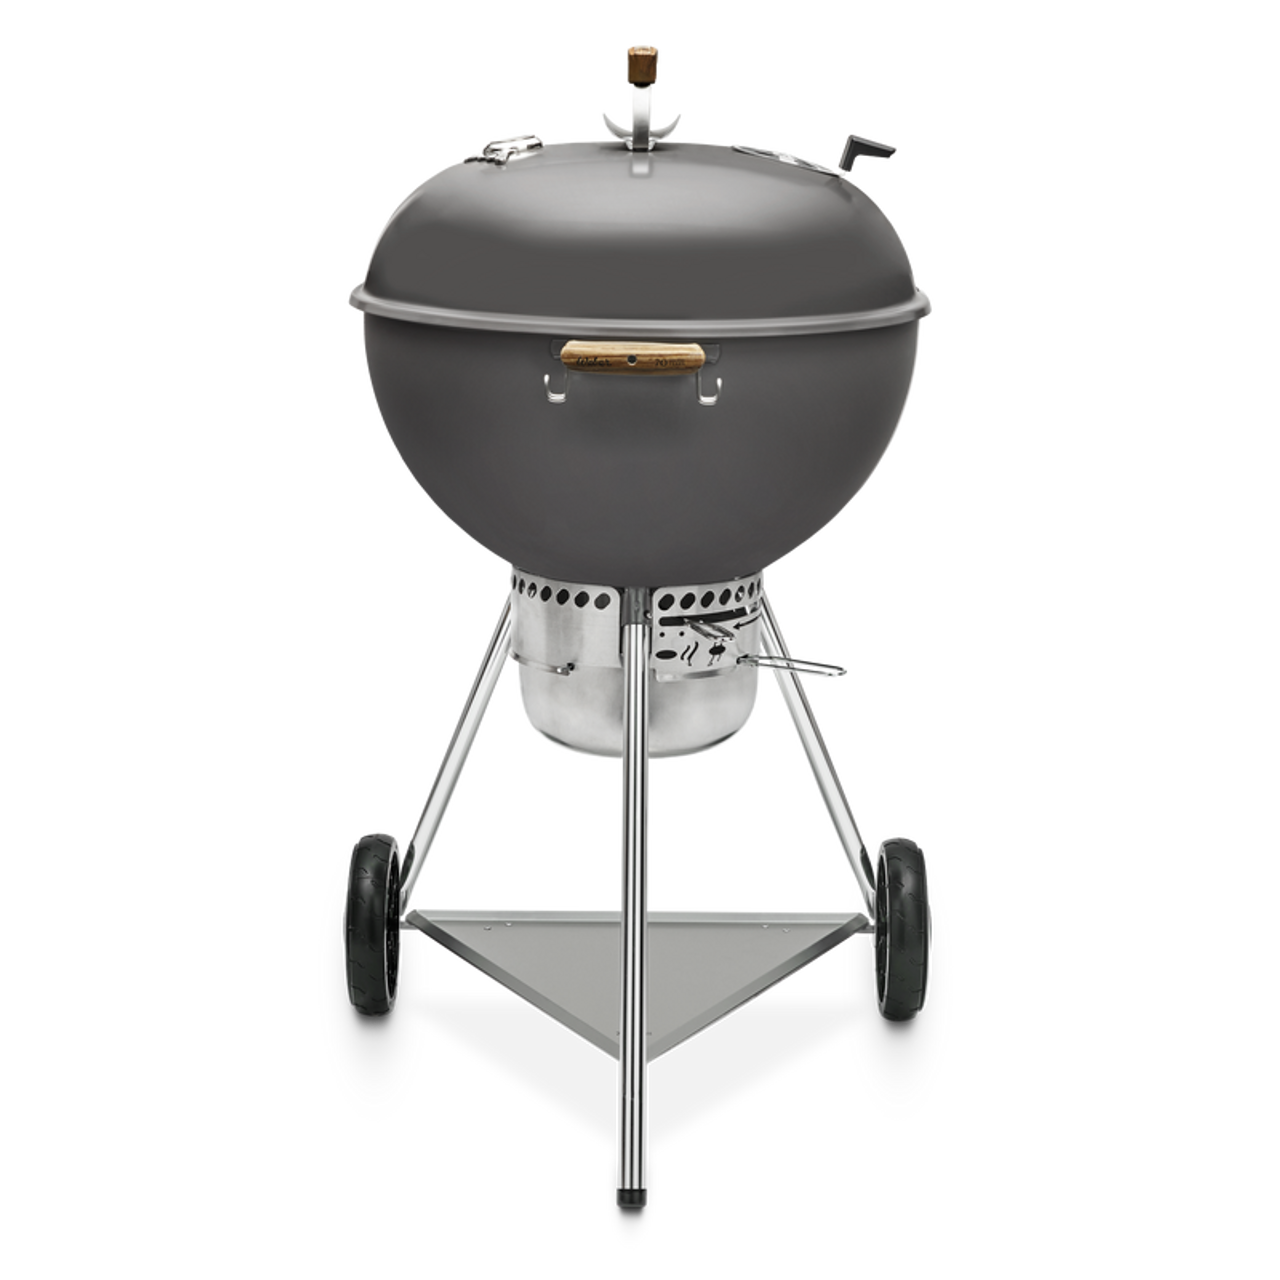 70th Anniversary Edition Kettle Charcoal Barbecue 57cm - Hollywood Grey